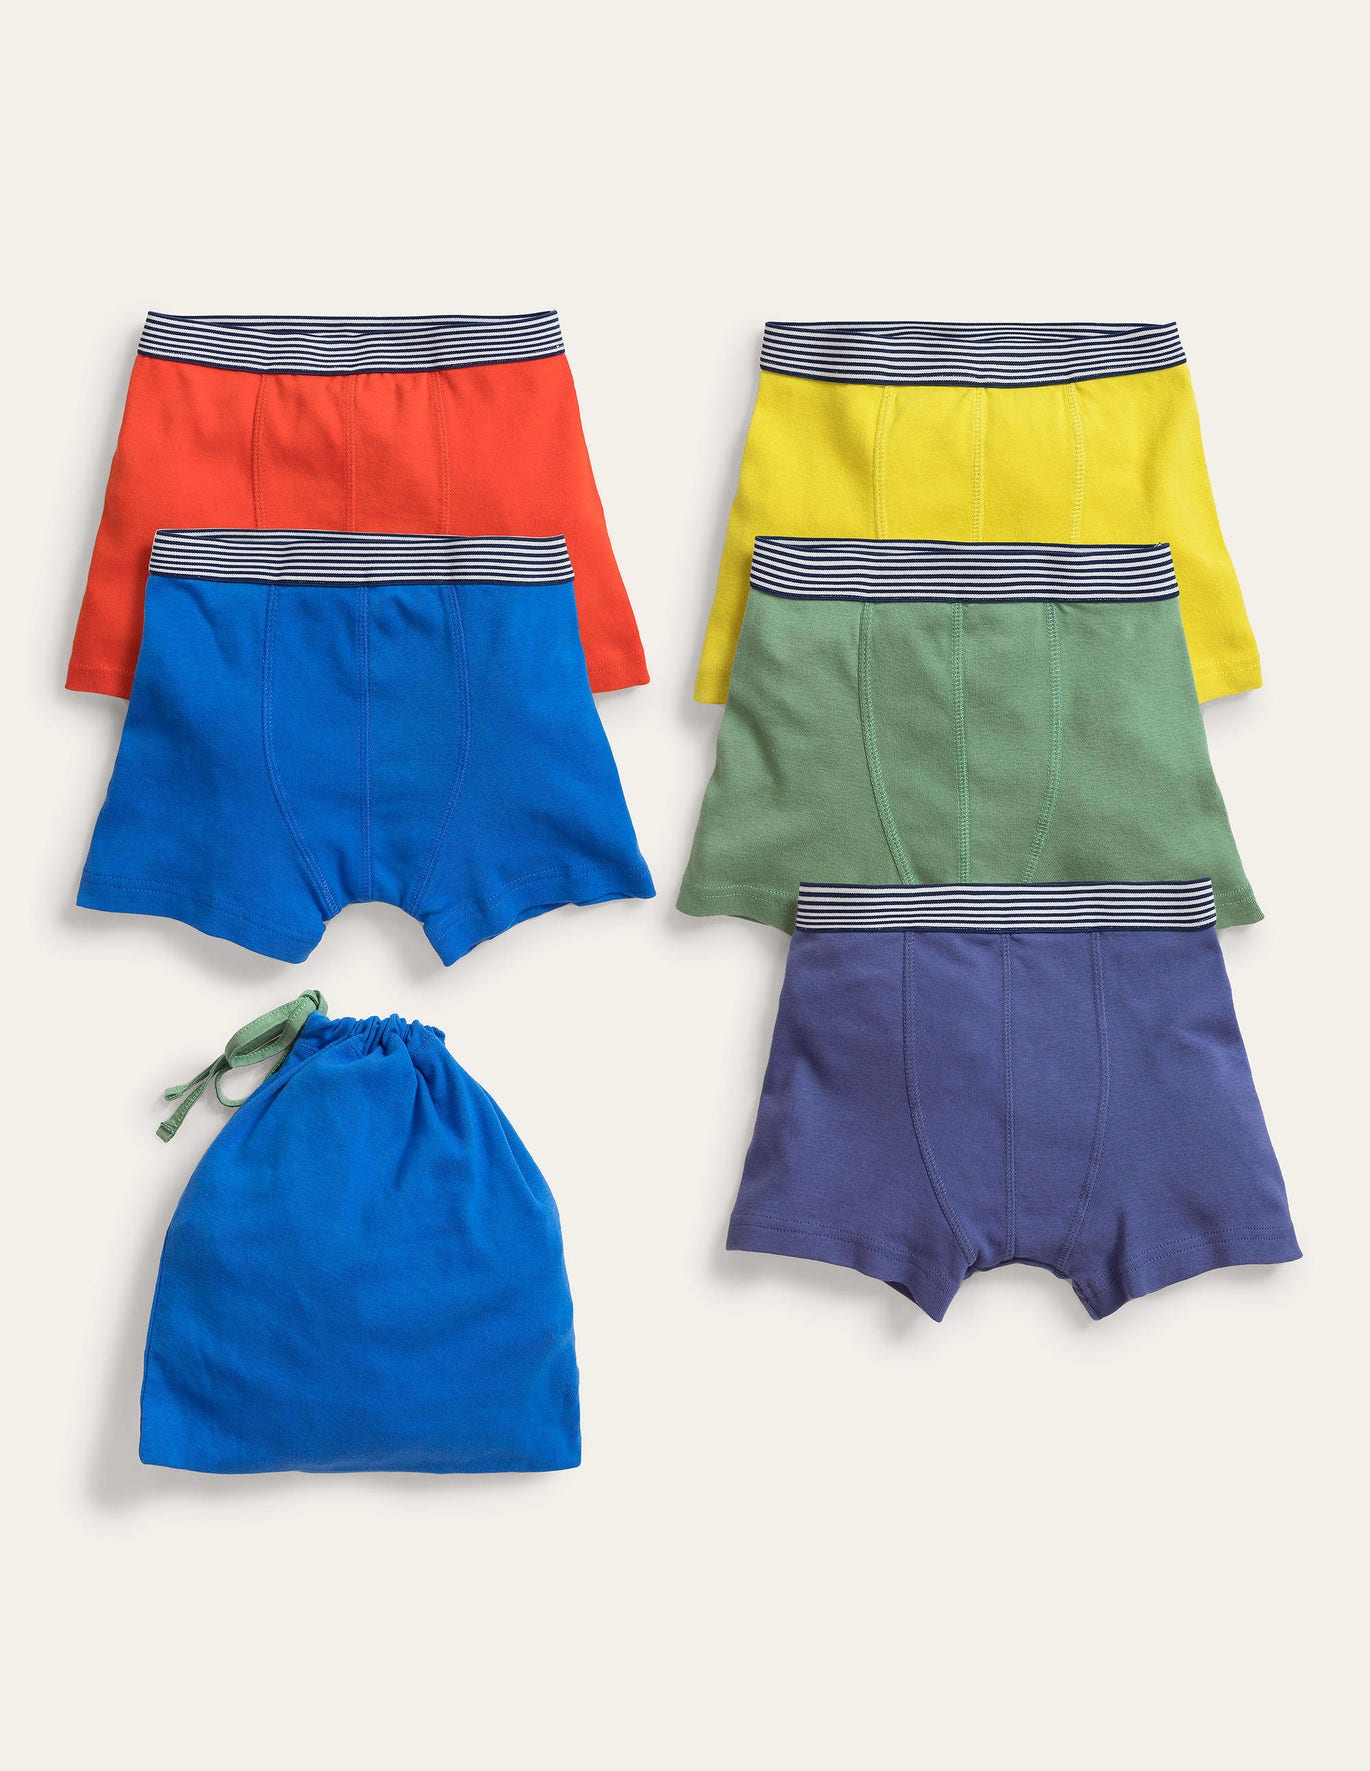 Boden Boxers 5 Pack - Multi Brights